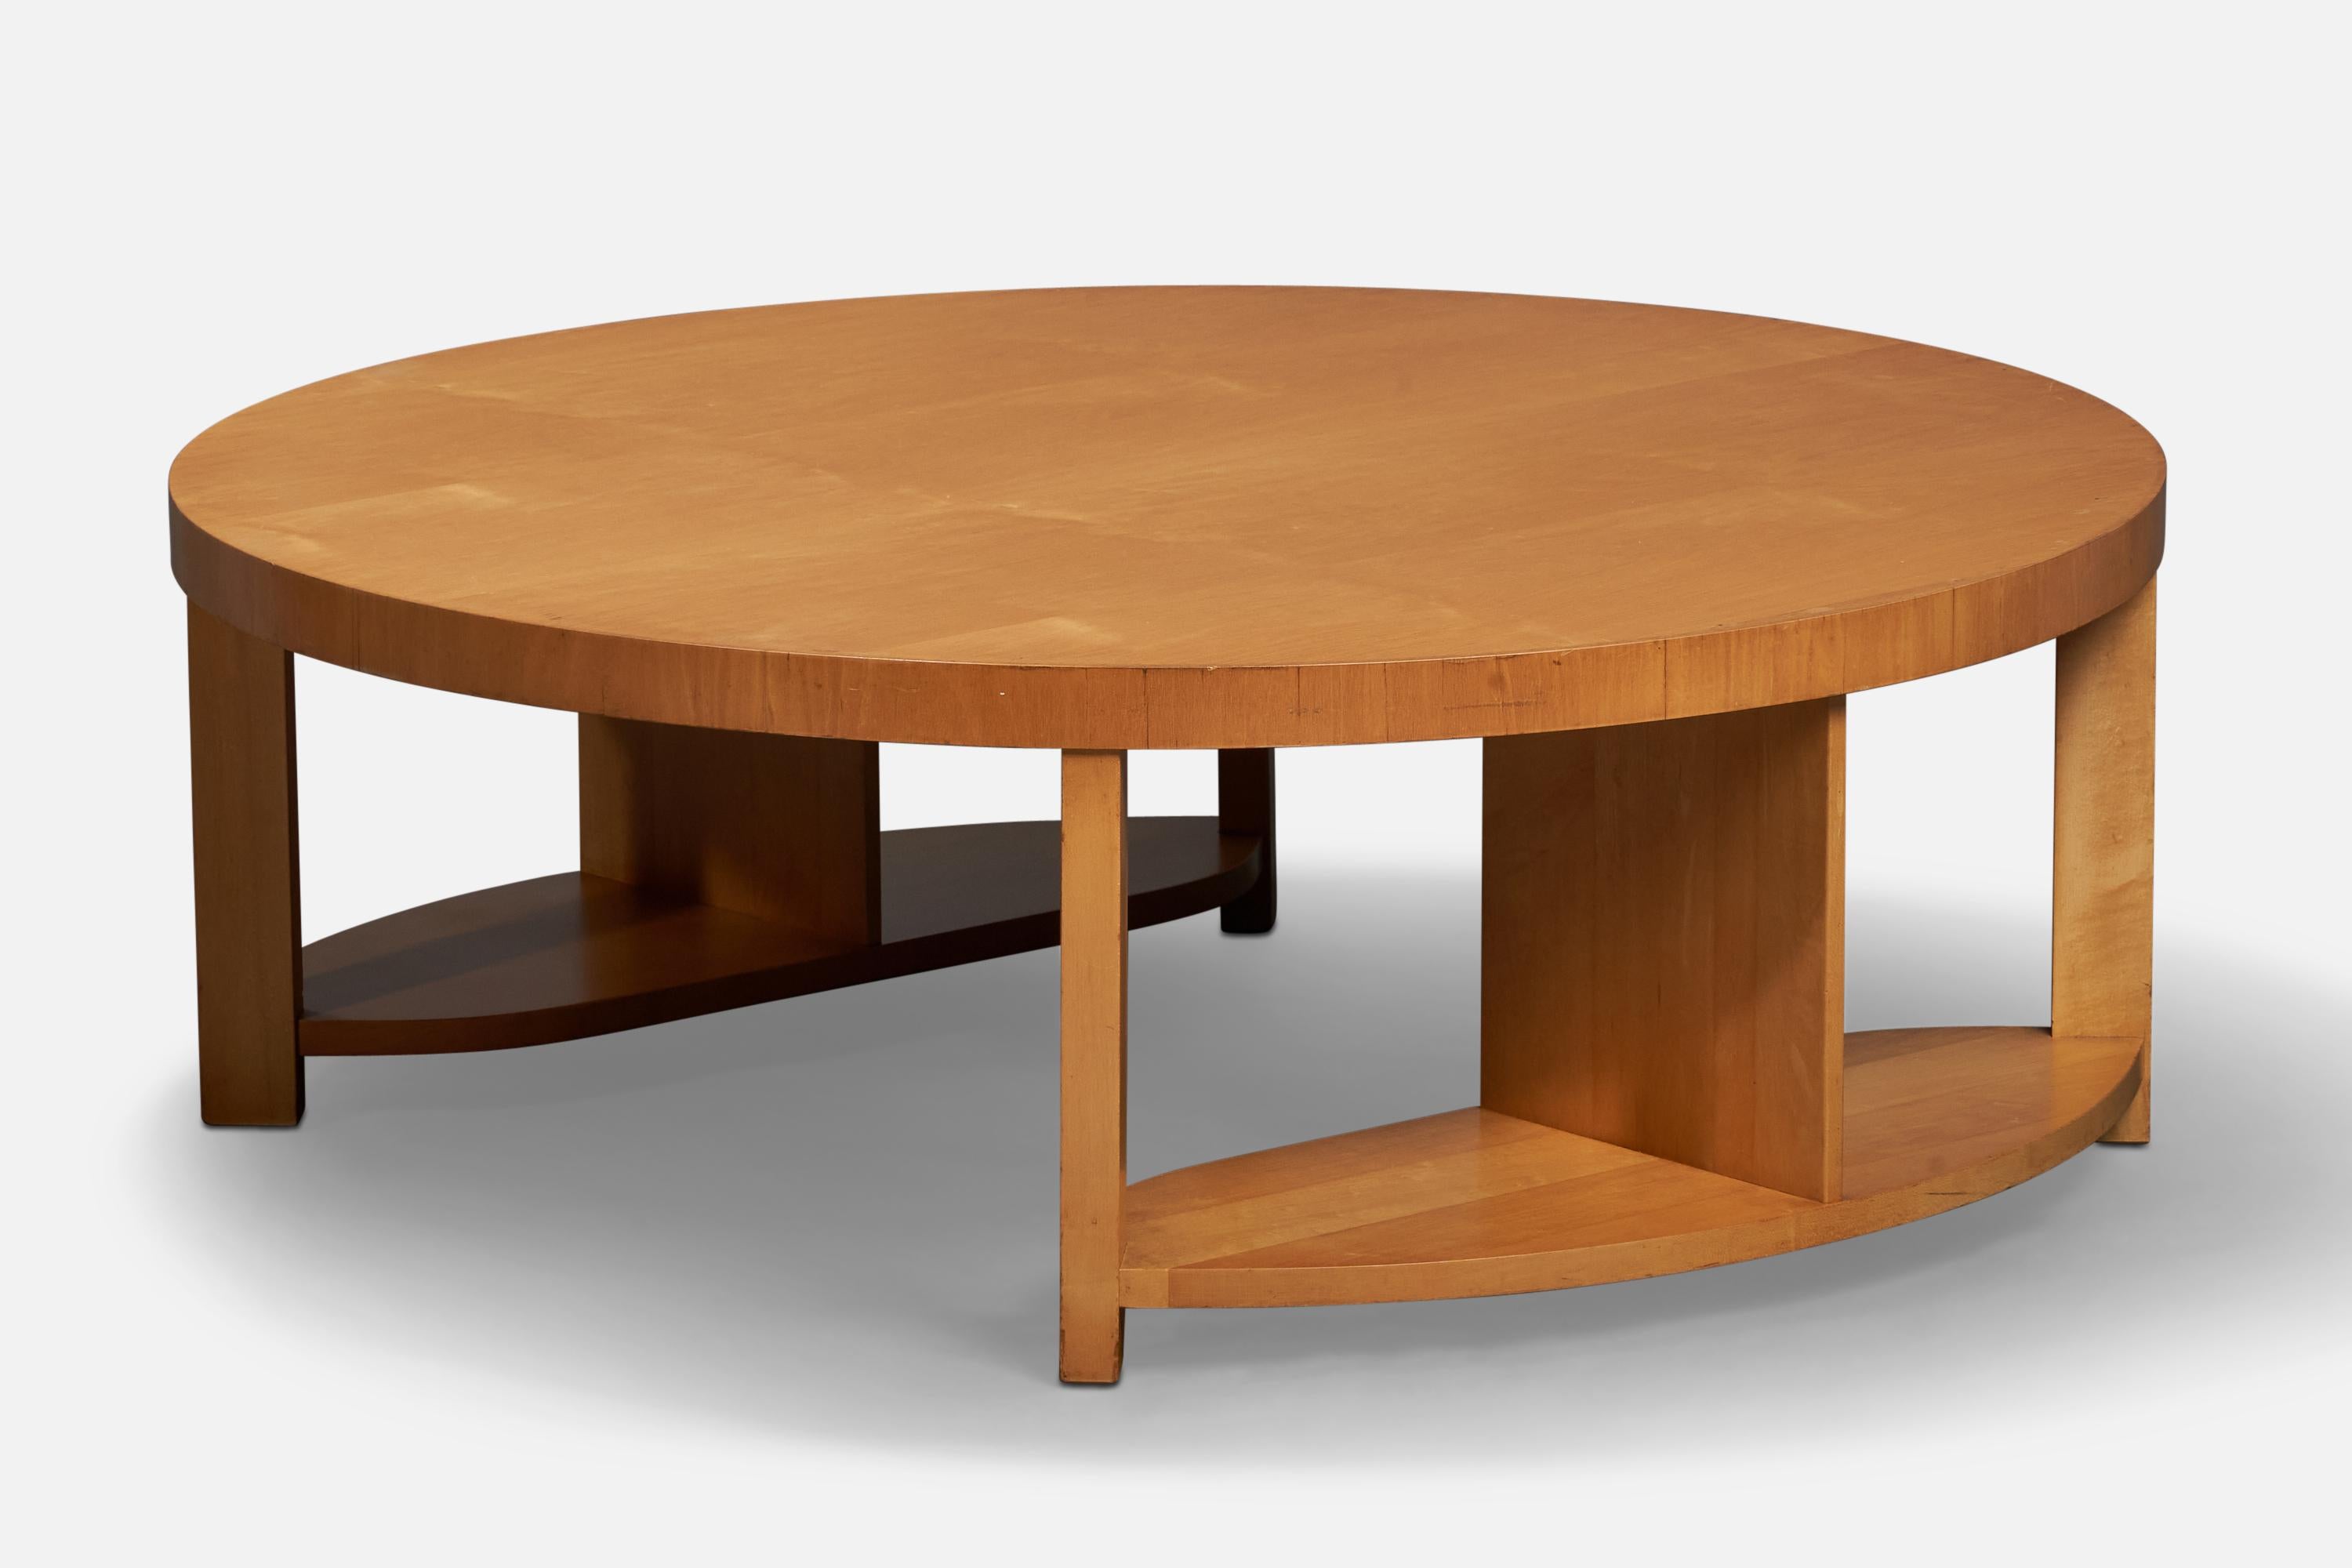 A wood coffee table designed by Paul Laszlo and produced by Brown Saltman, USA, 1950s.